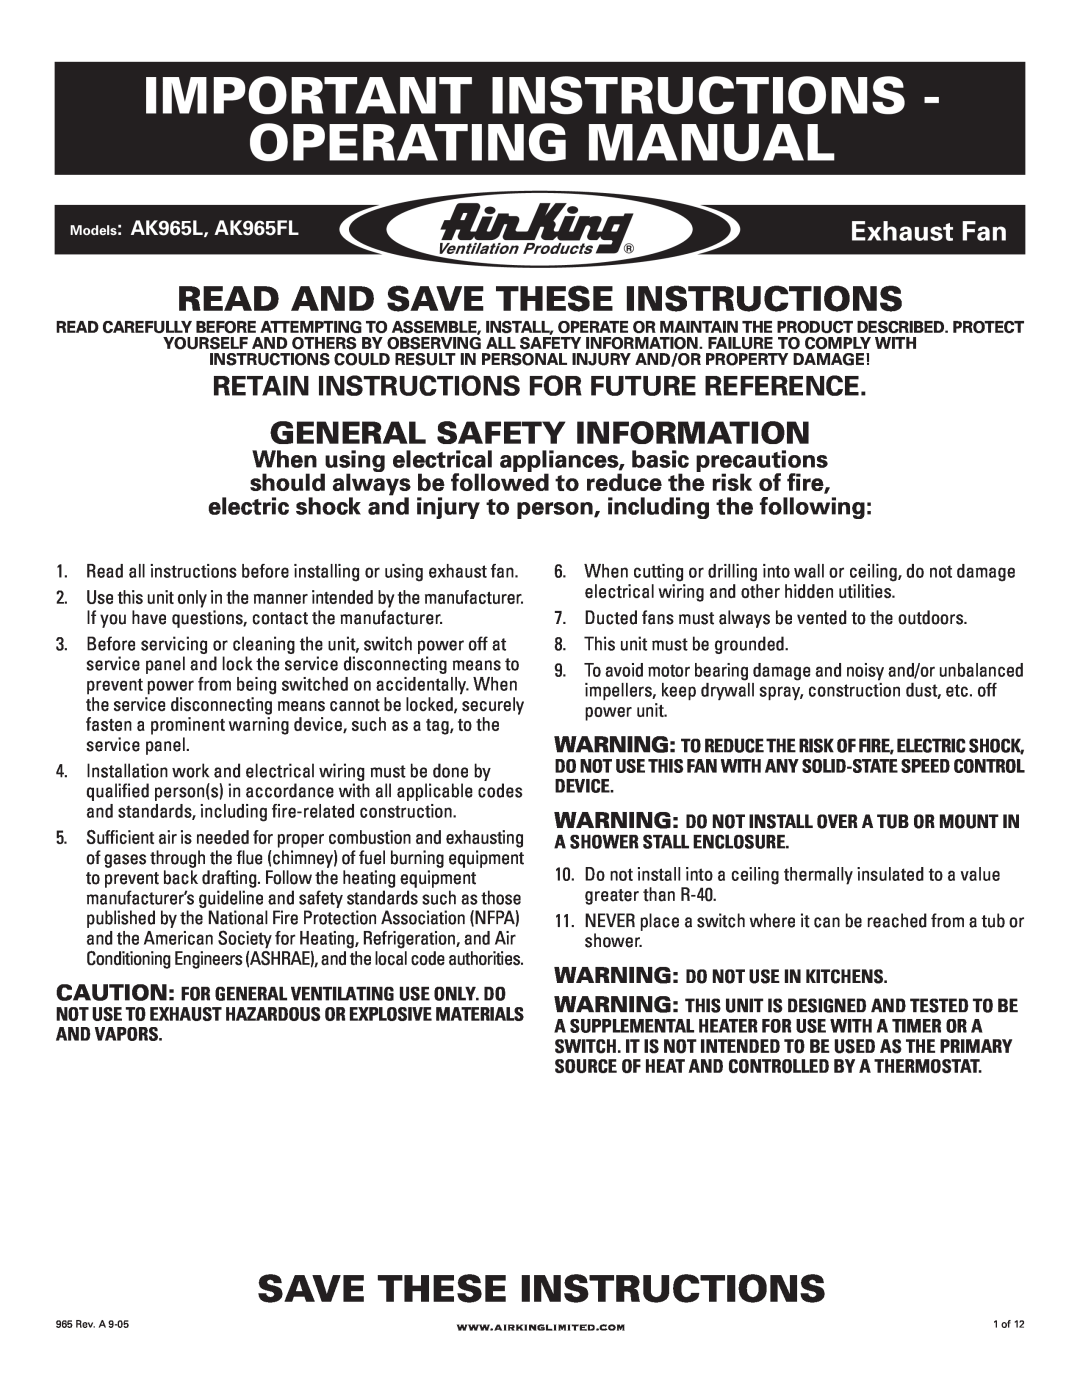 Air King AK965L, AK965FL manual Important Instructions Operating Manual, Read And Save These Instructions, Exhaust Fan 